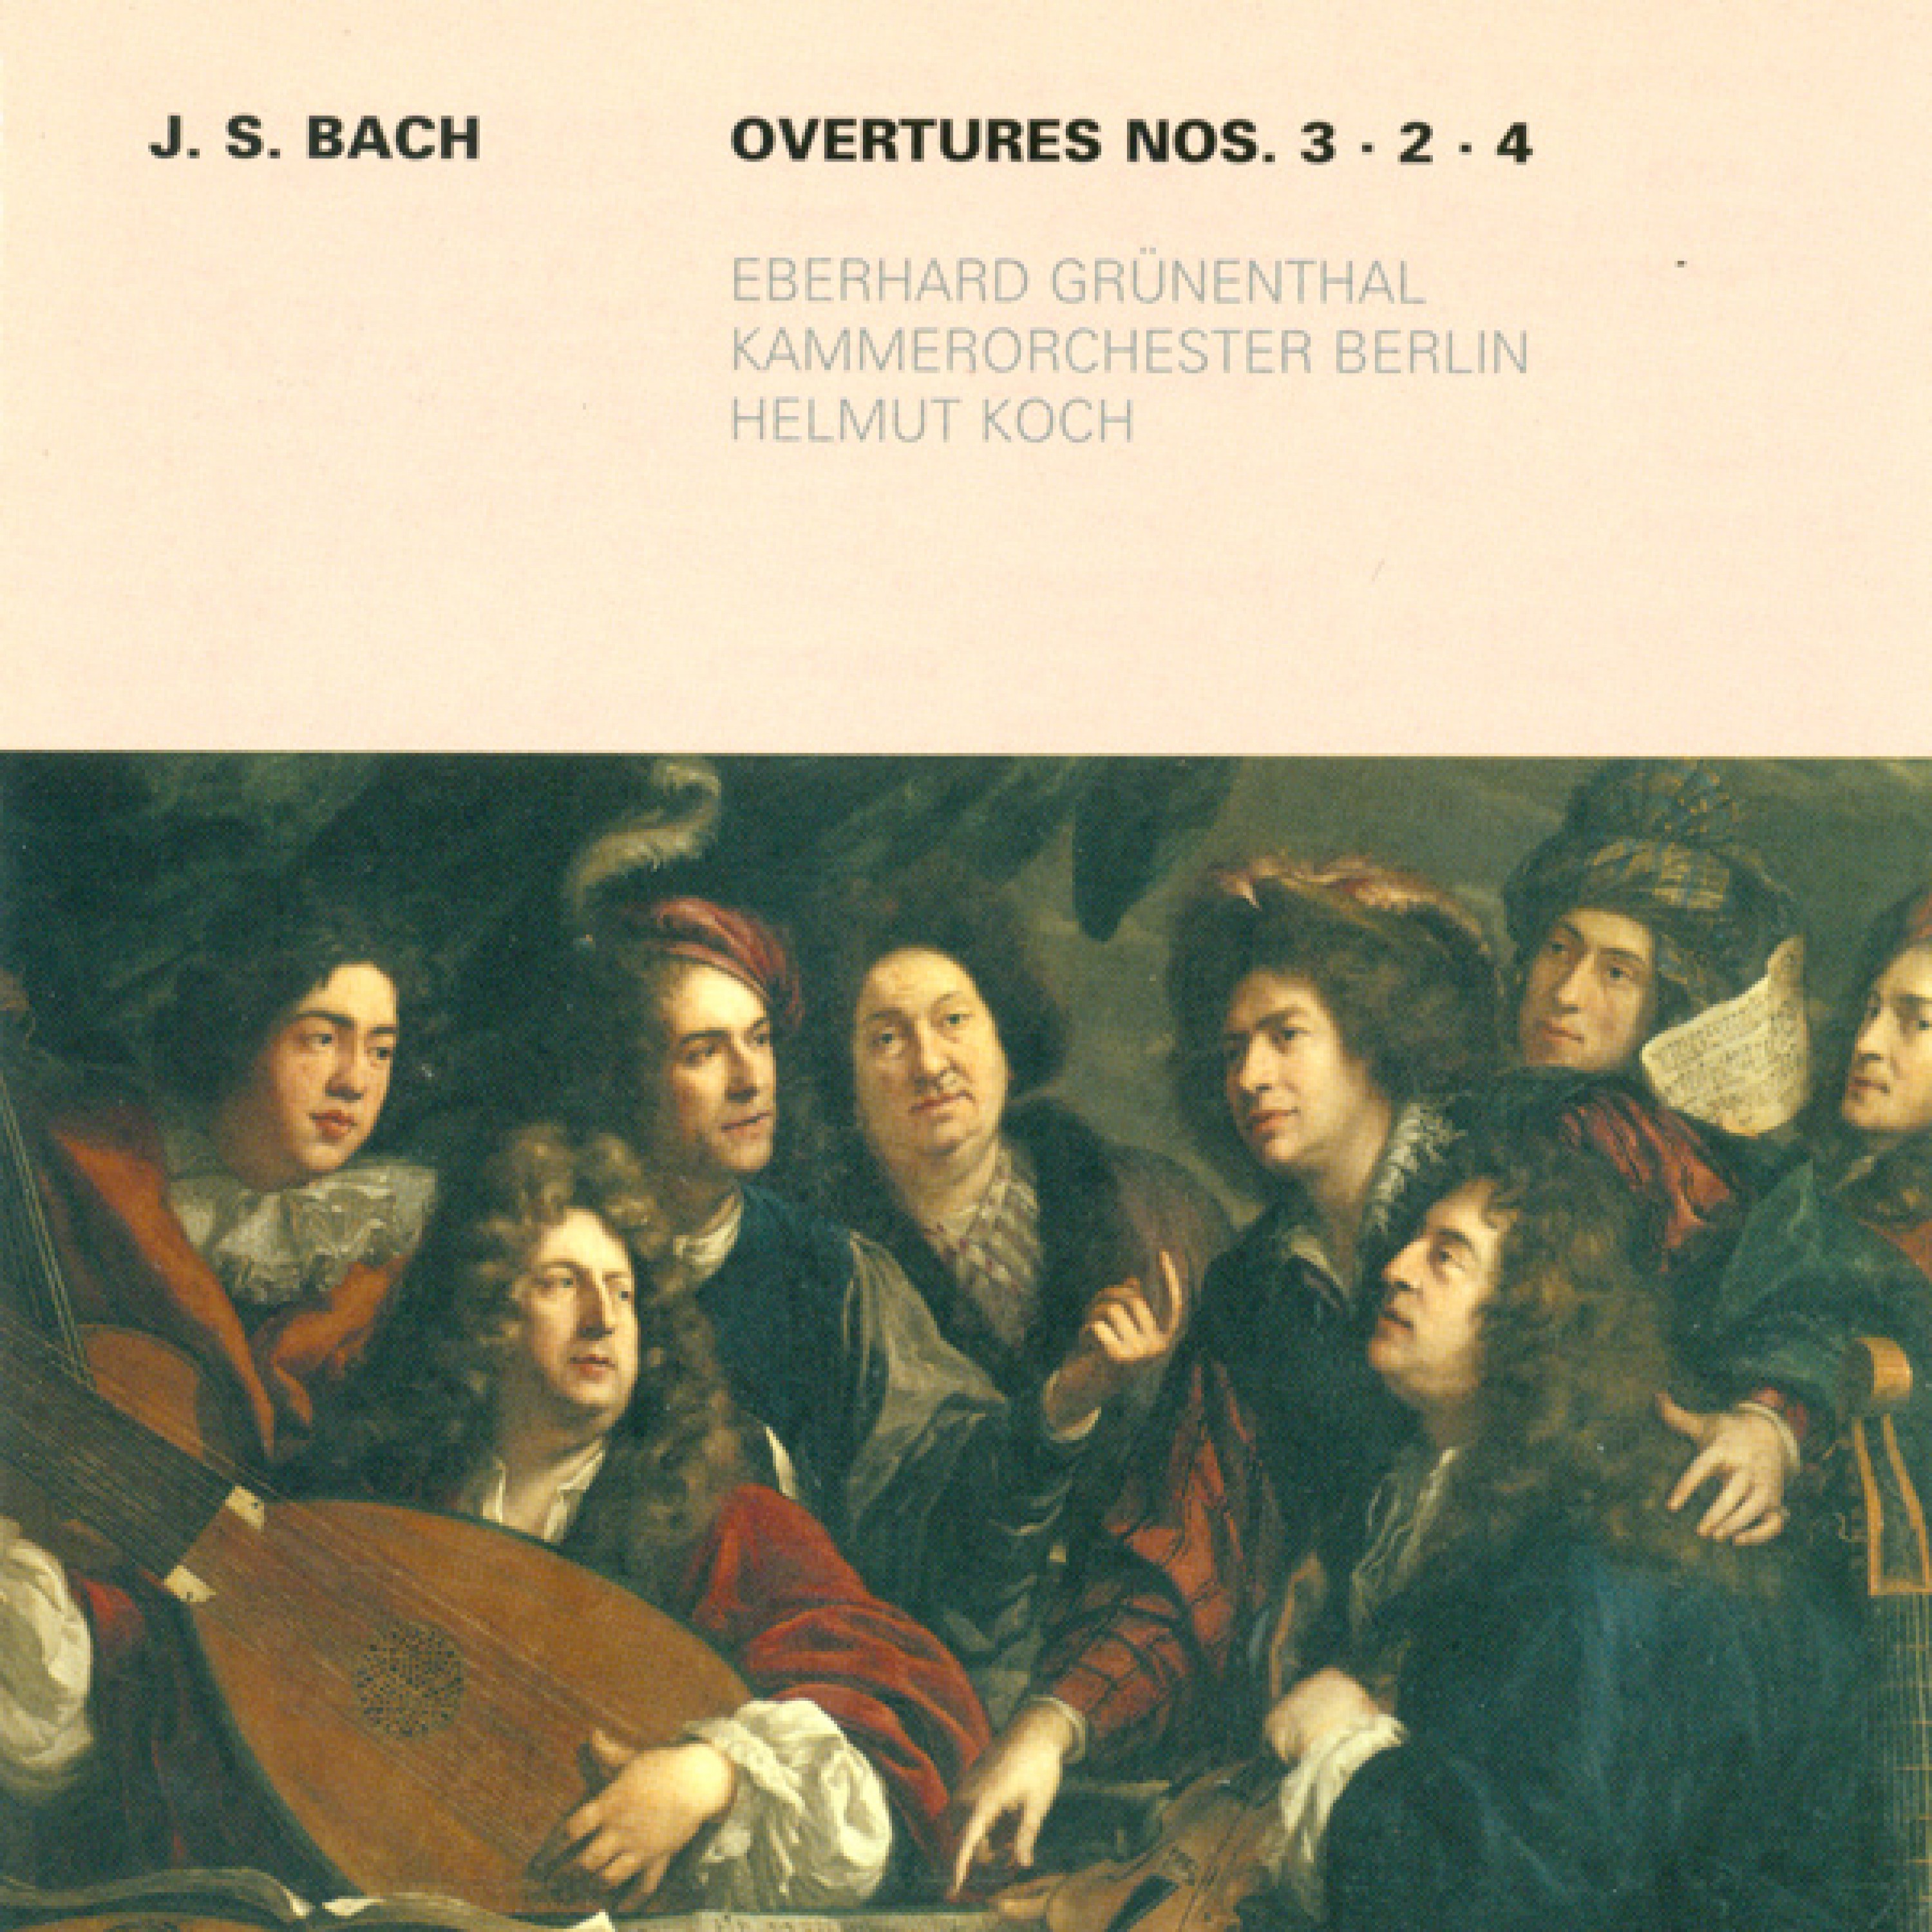 Overture (Suite) No. 2 in B Minor, BWV 1067: V. Polonaise - Double